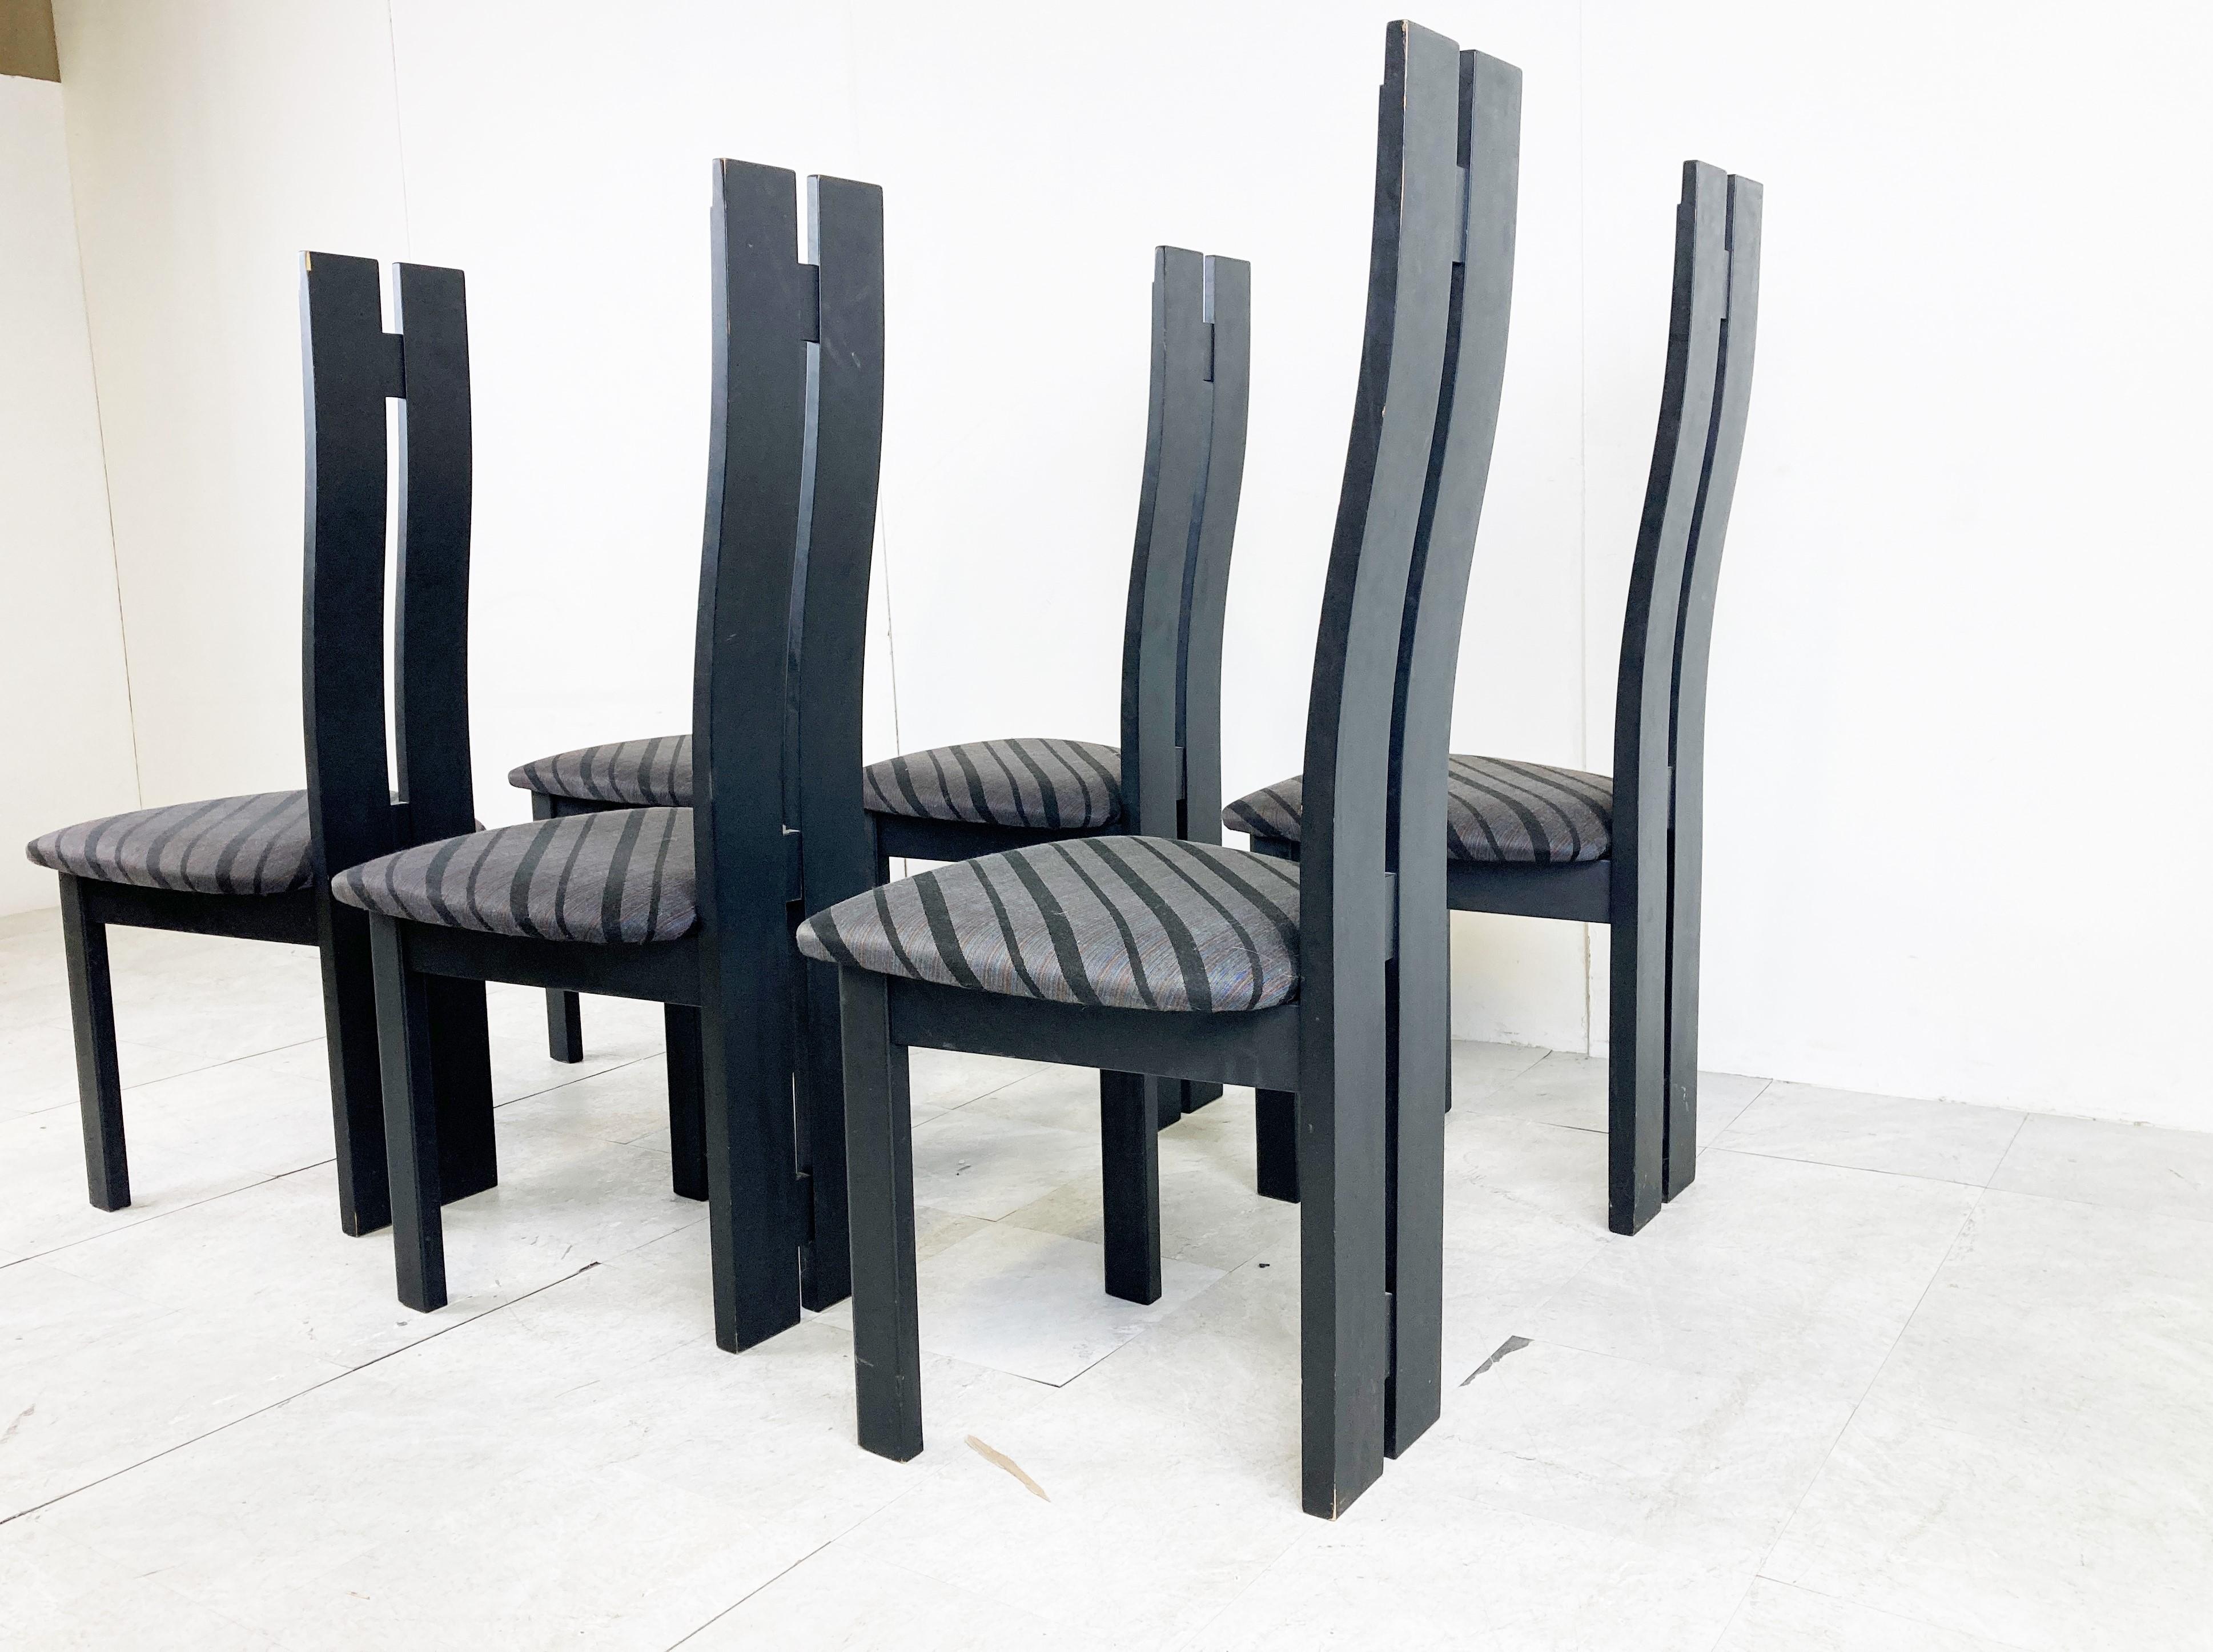 Fabric Set of 6 Black Wooden High Back Dining Chairs, 1980s For Sale